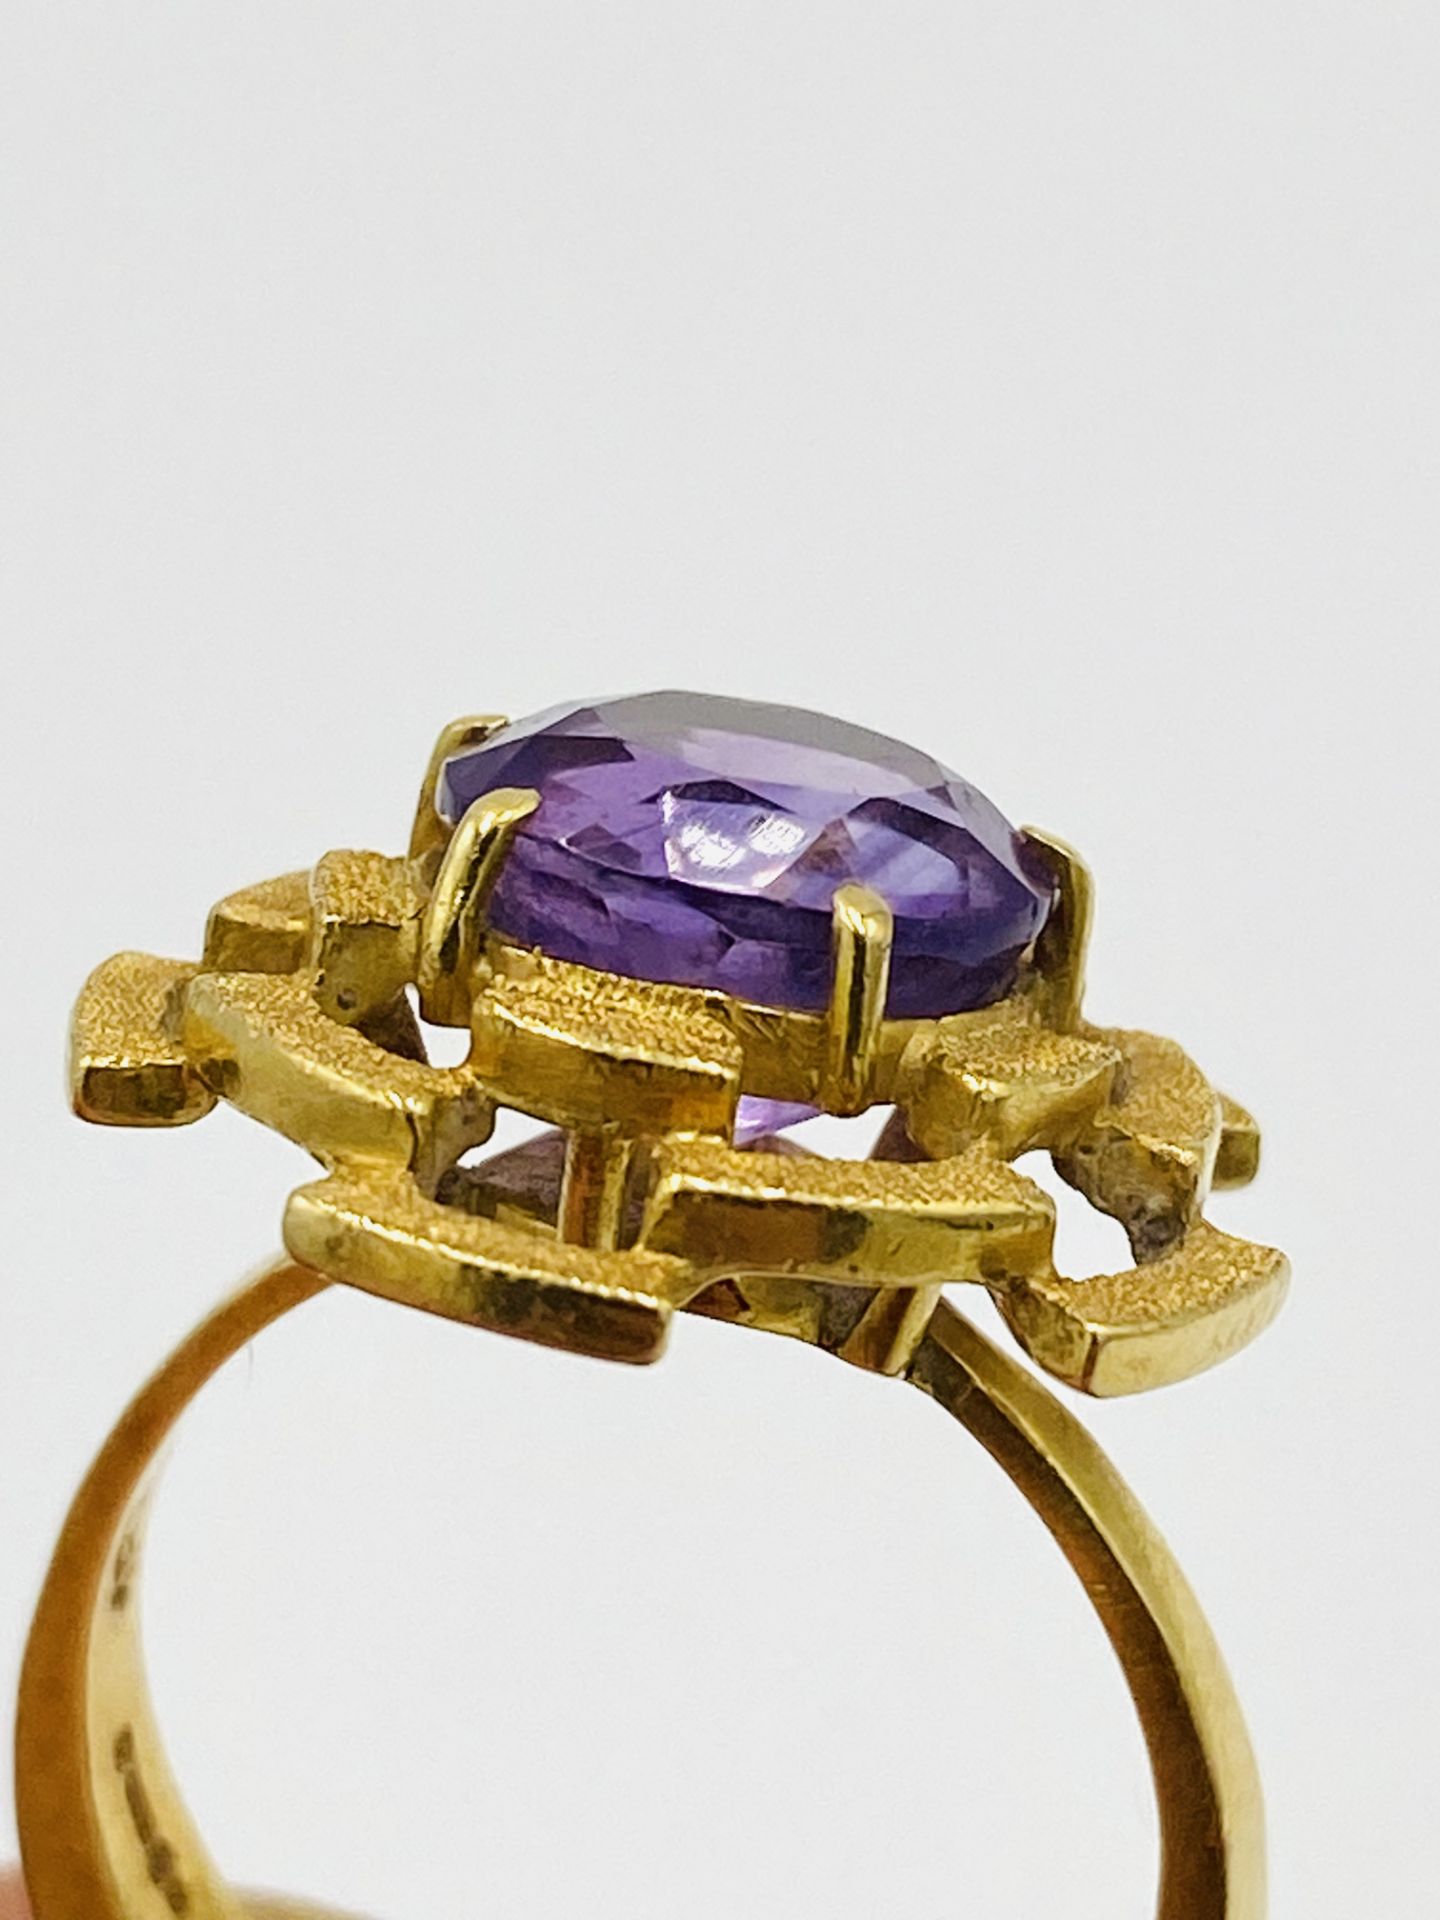 1970's 18ct gold ring with central amethyst stone - Image 3 of 4